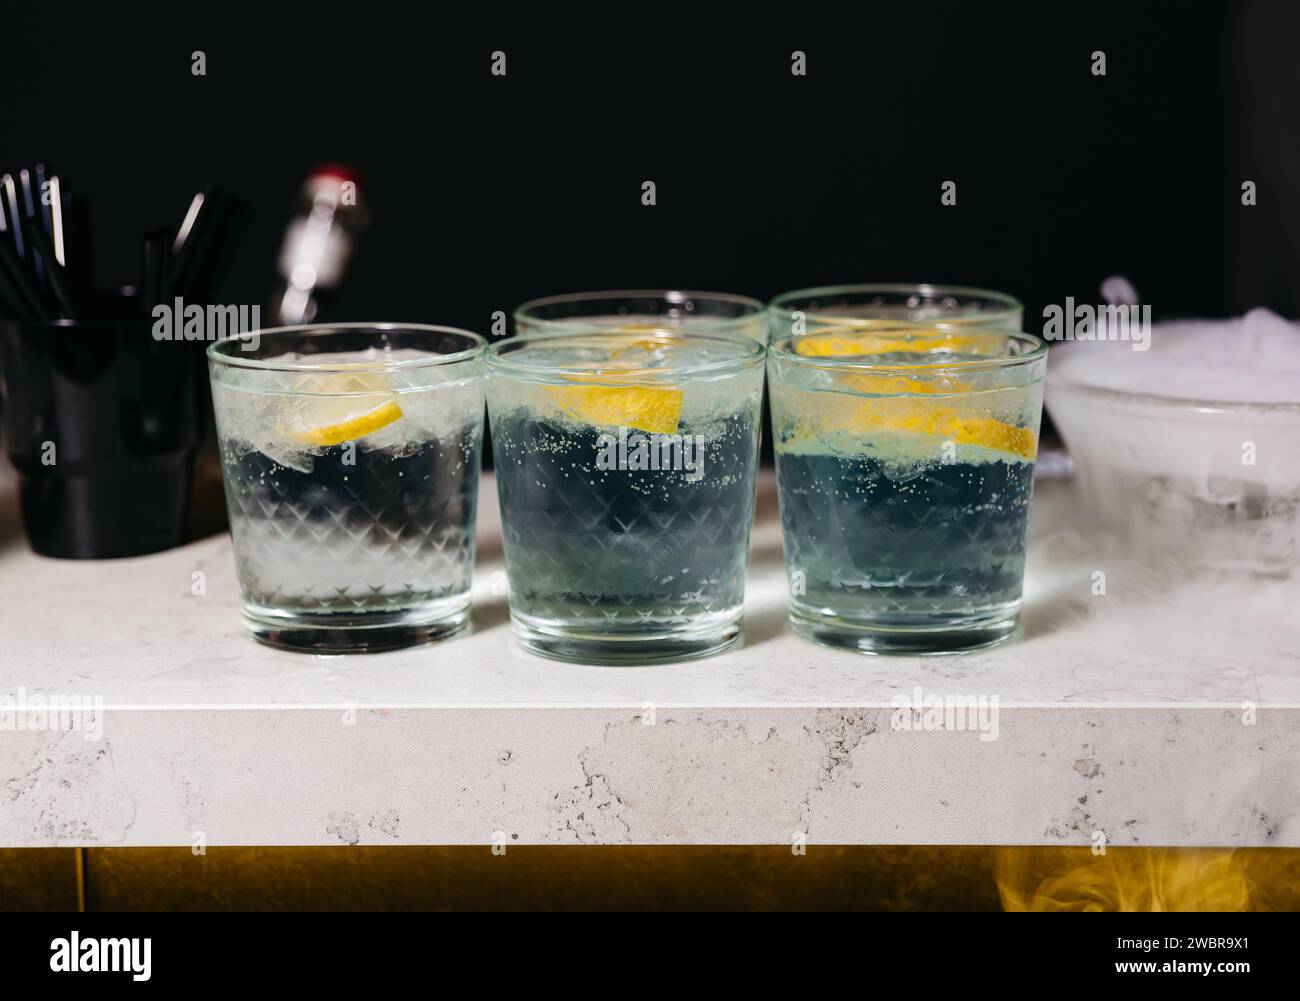 Four mysterious smoky cocktails served on a marble bar counter, each garnished with a slice of lemon, in a dark atmospheric setting. Stock Photo